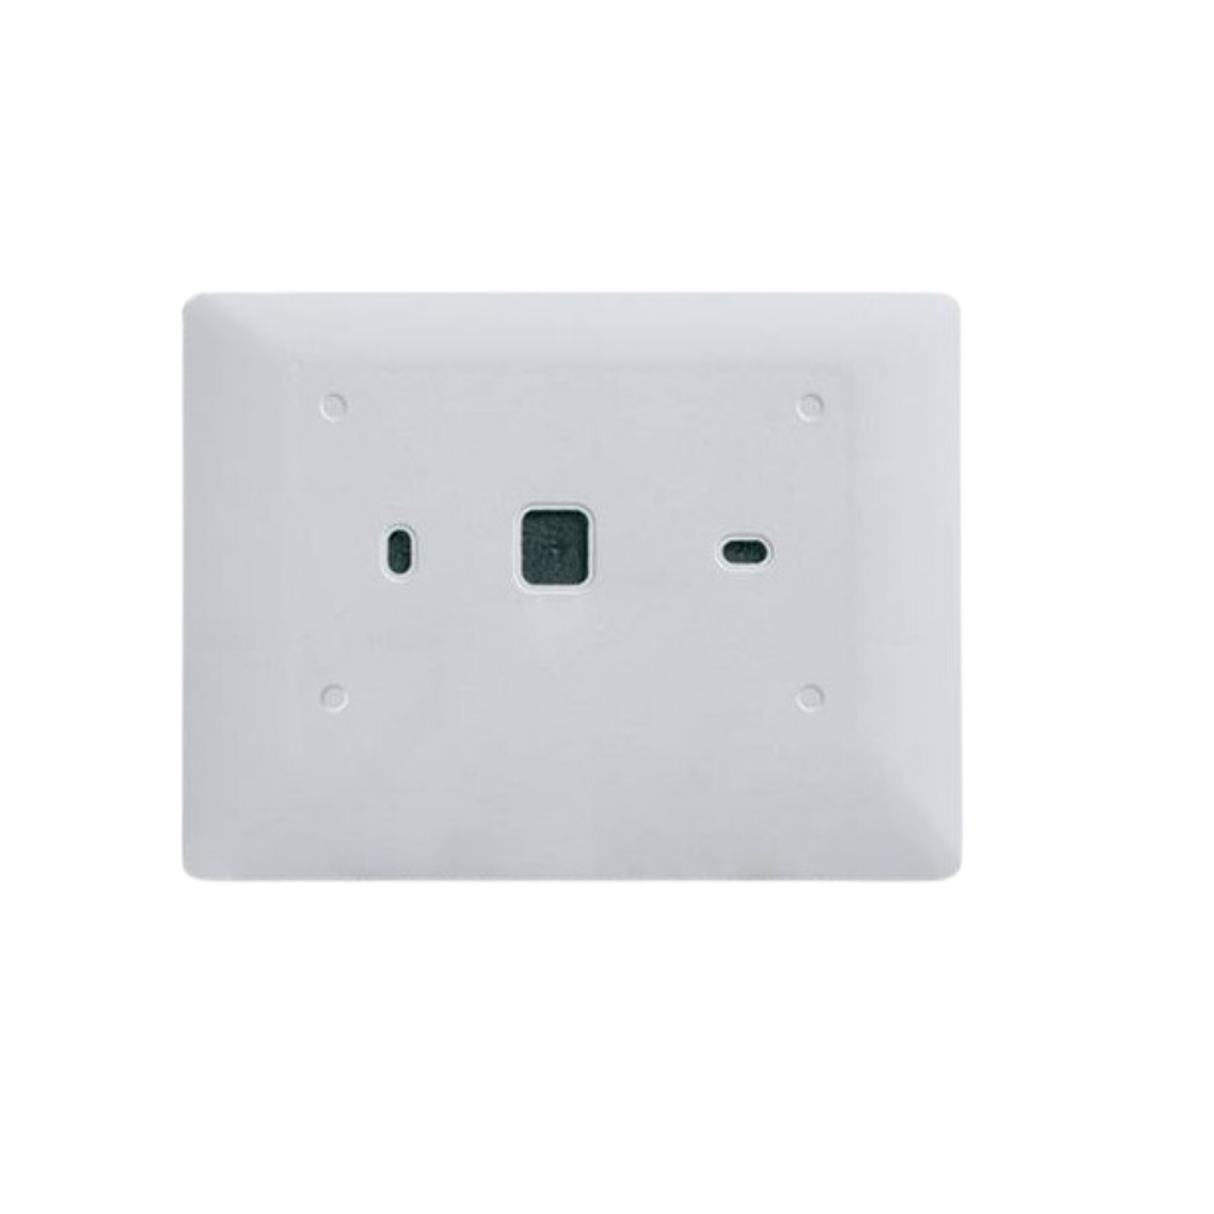 ICM Controls ACC-WP03 5 3/4" x 7 1/2", Large, Universal, Insulated Thermostat Wall Plate